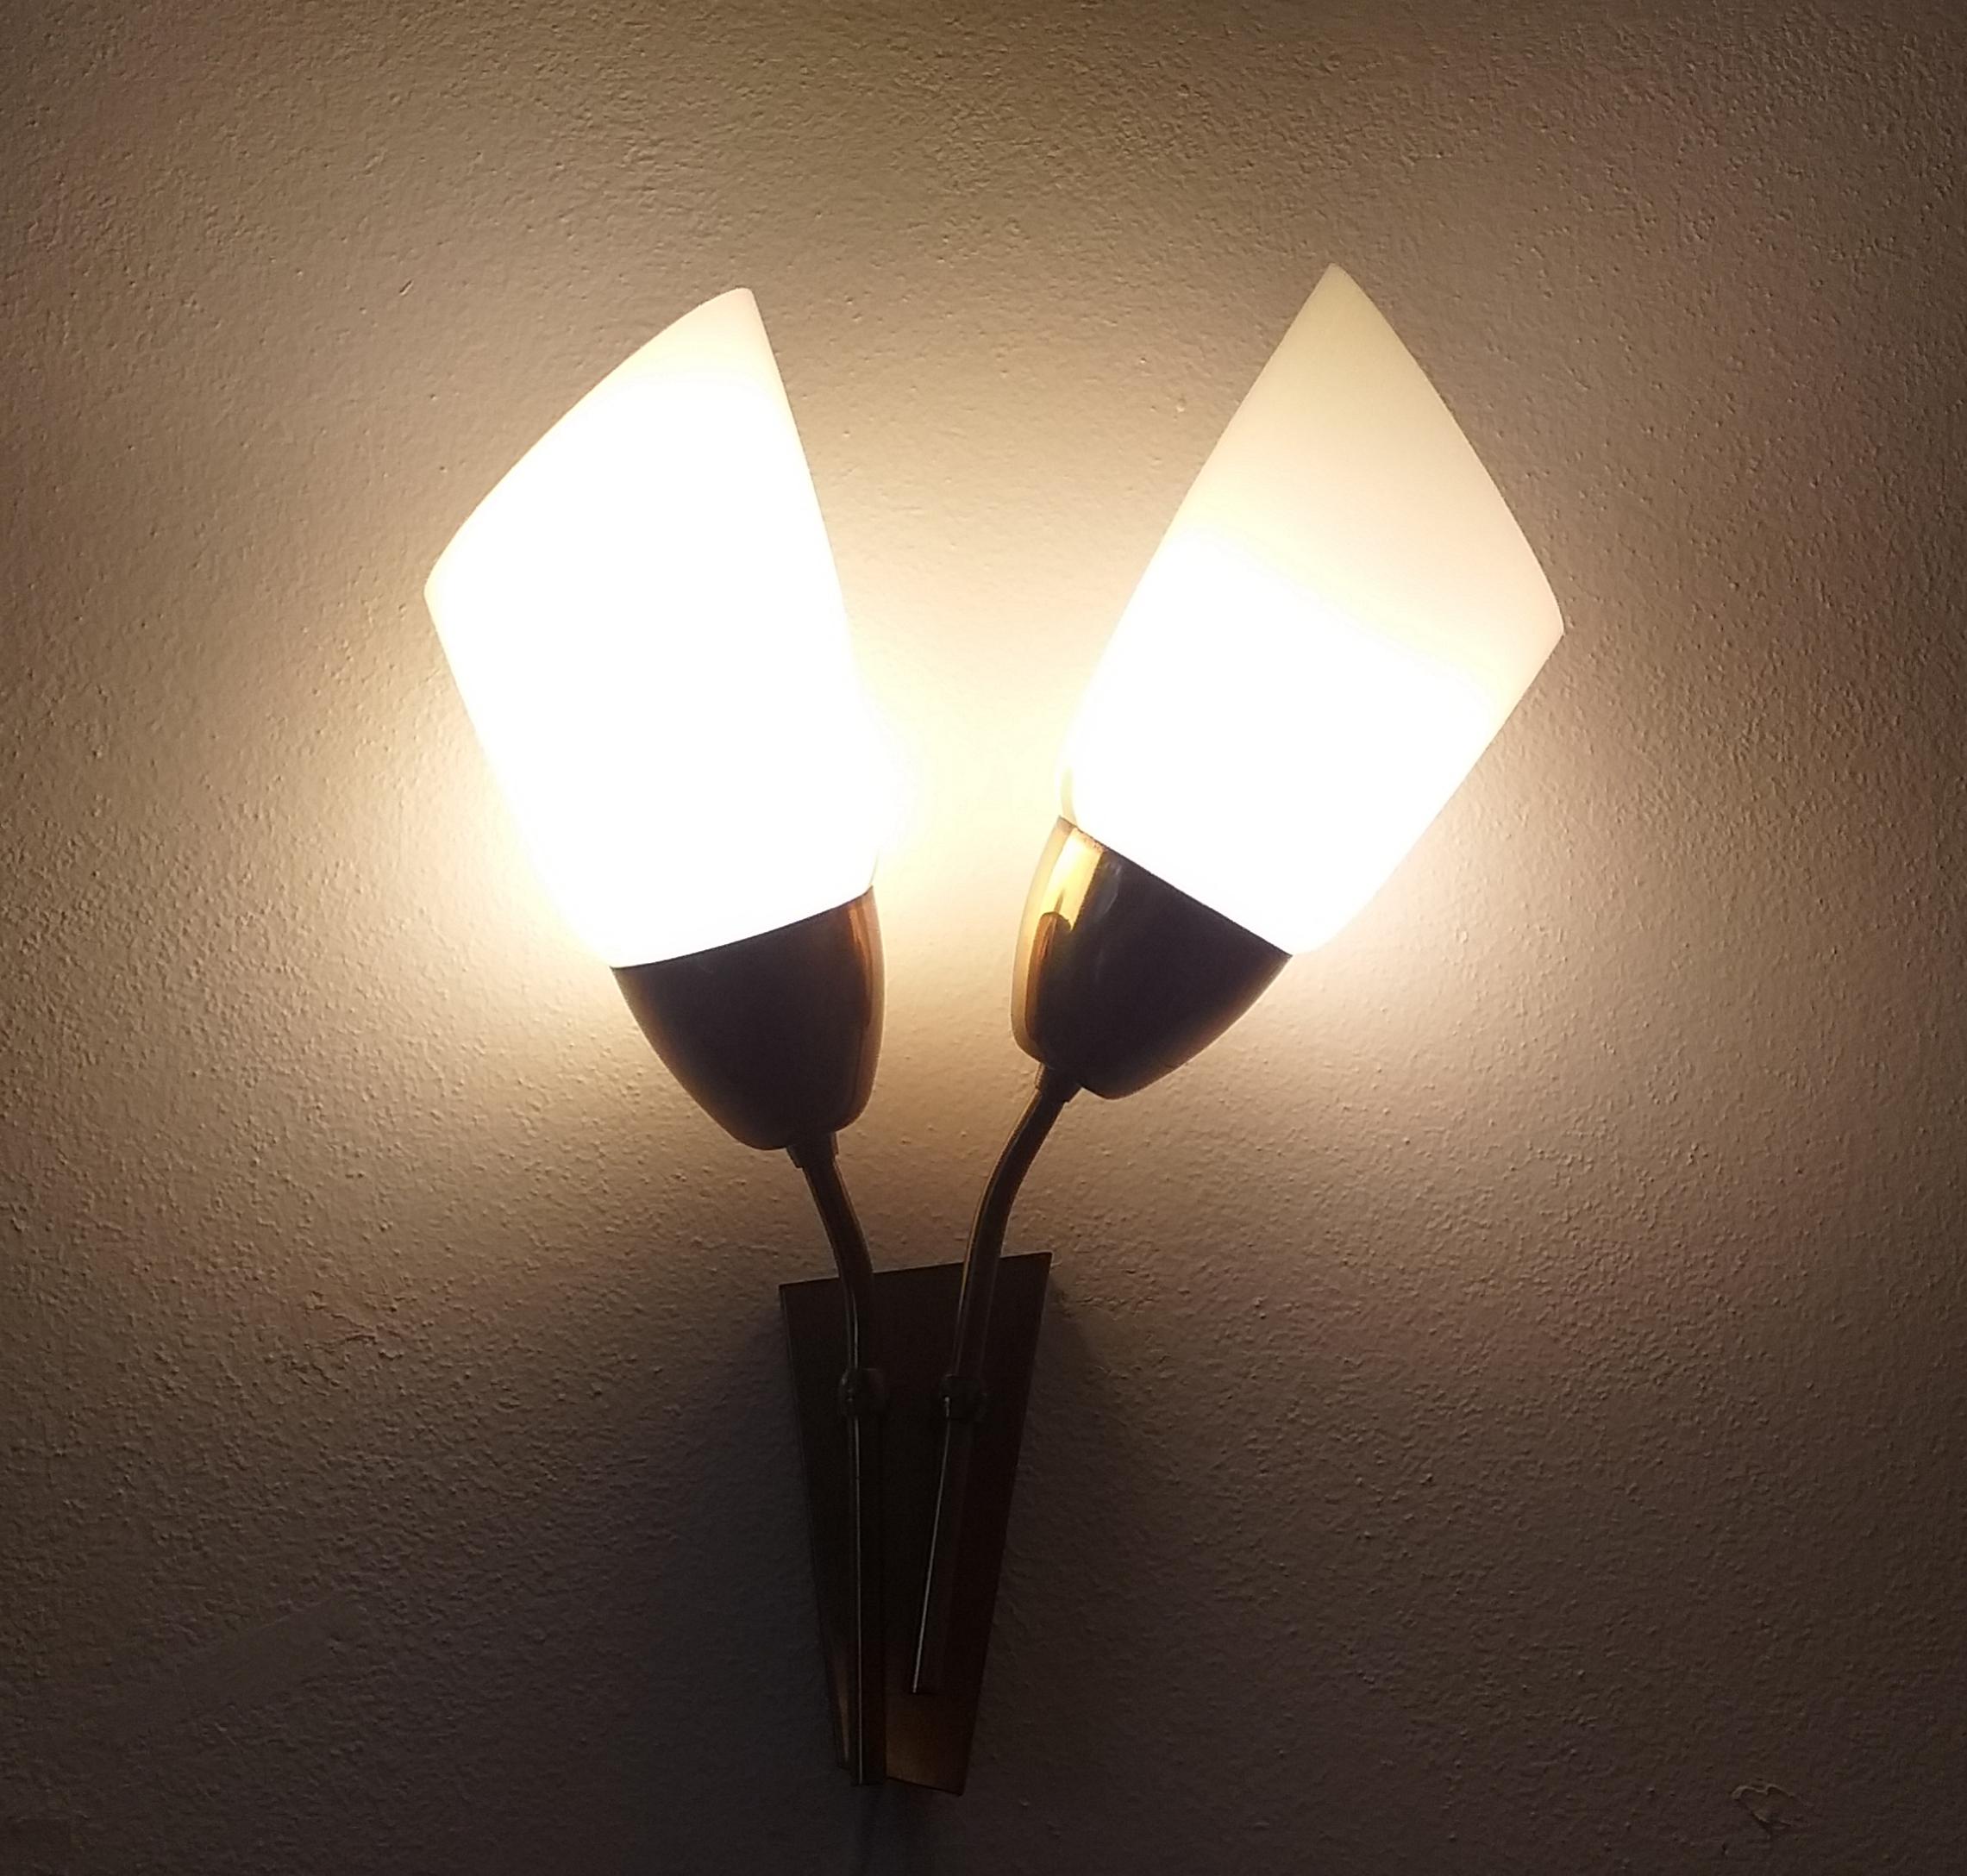 Pair of Midcentury Wall Lamps Kamenicky Senov, 1970s For Sale 3